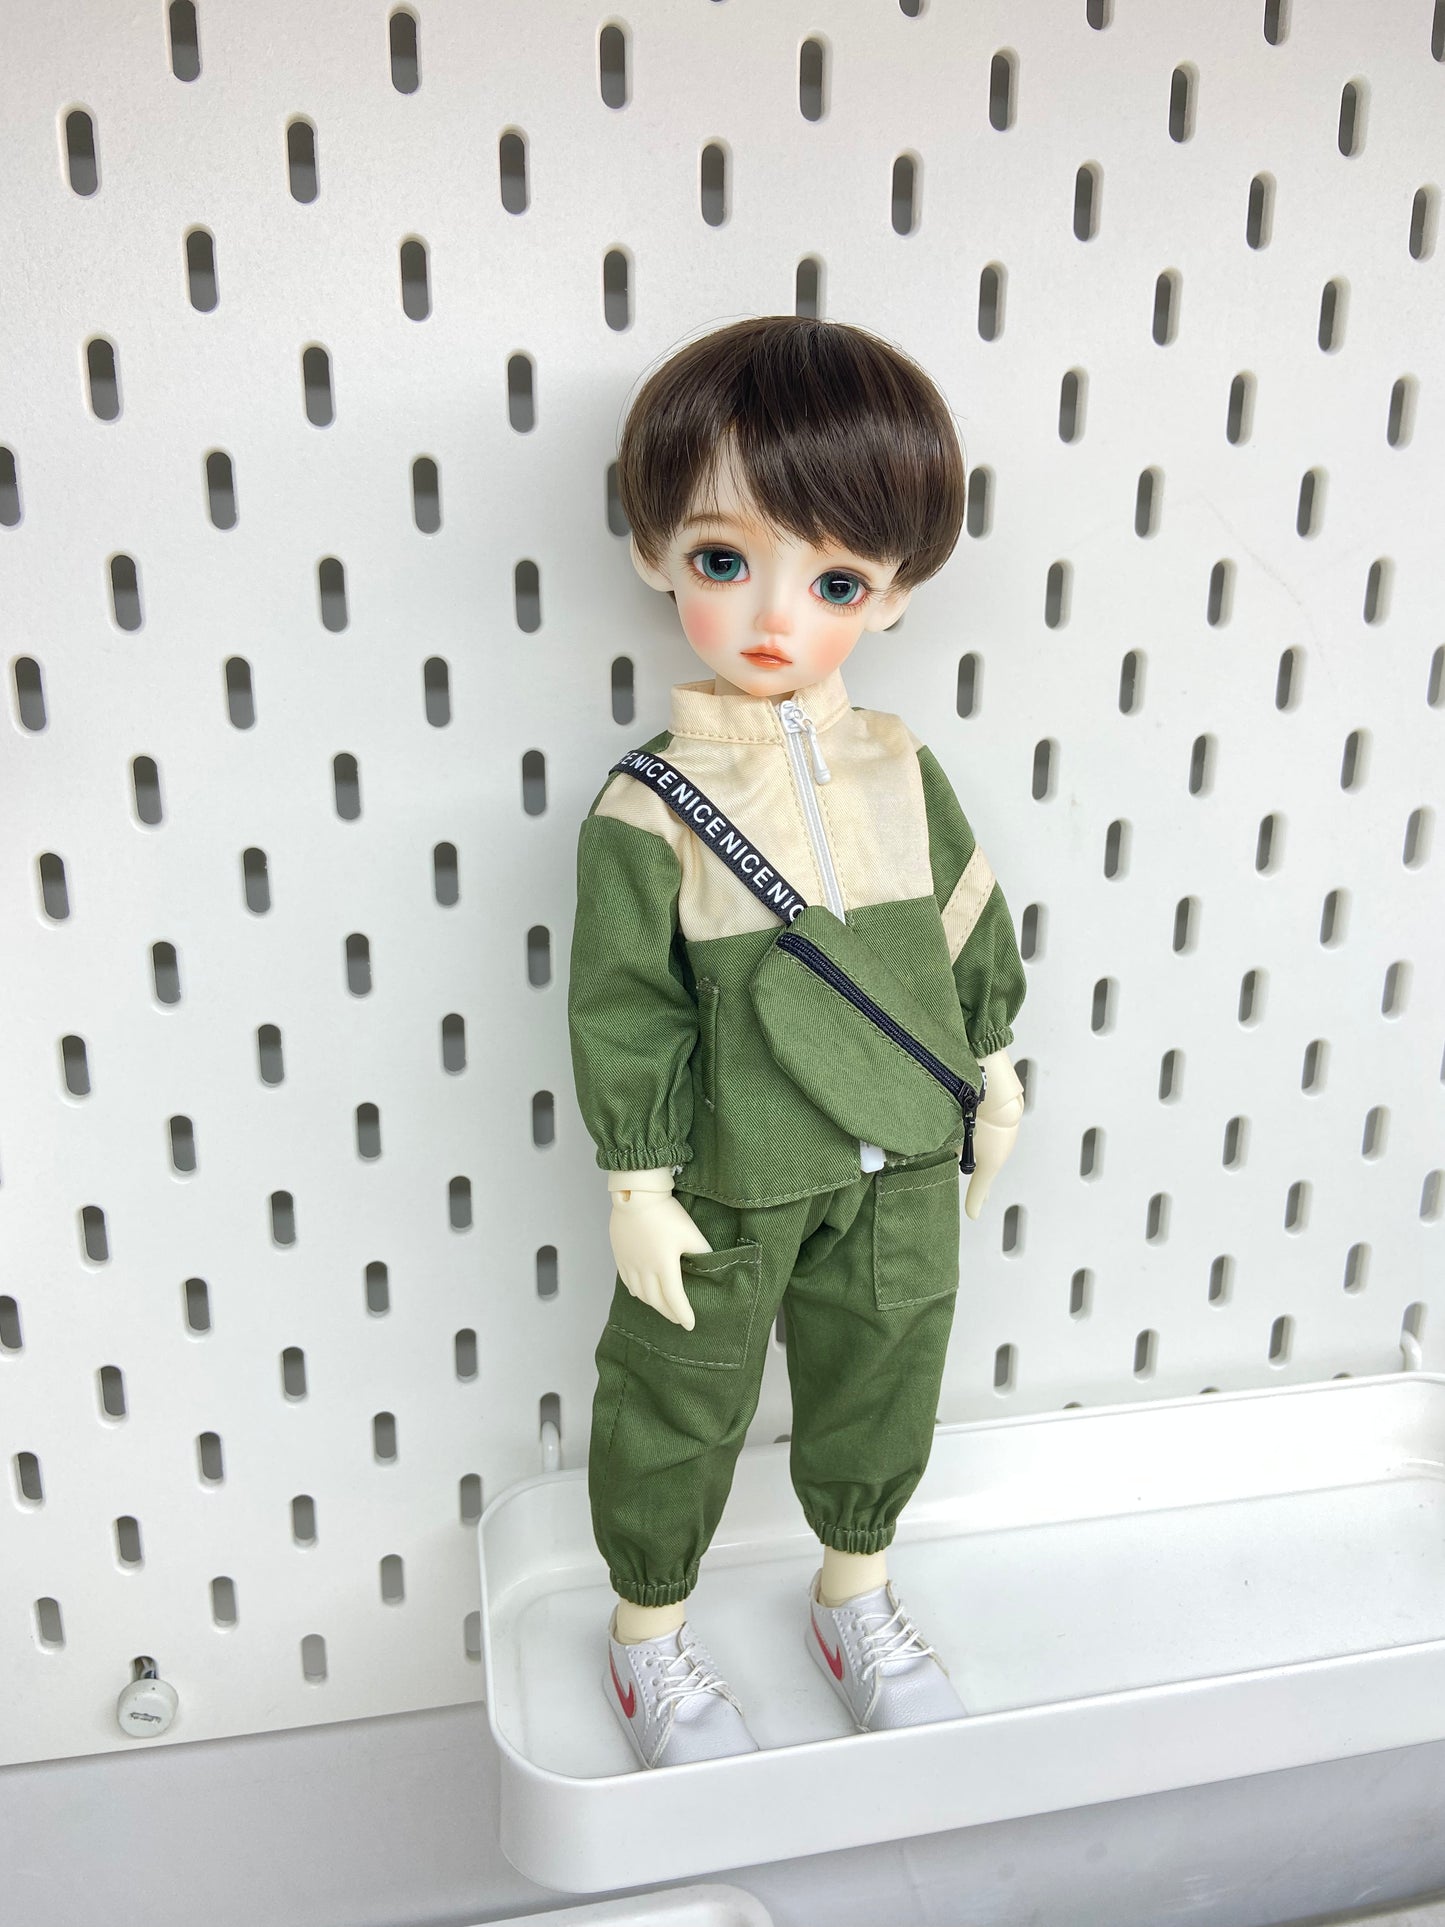 1/6 30cm boy doll Tony in normal skin with makeup